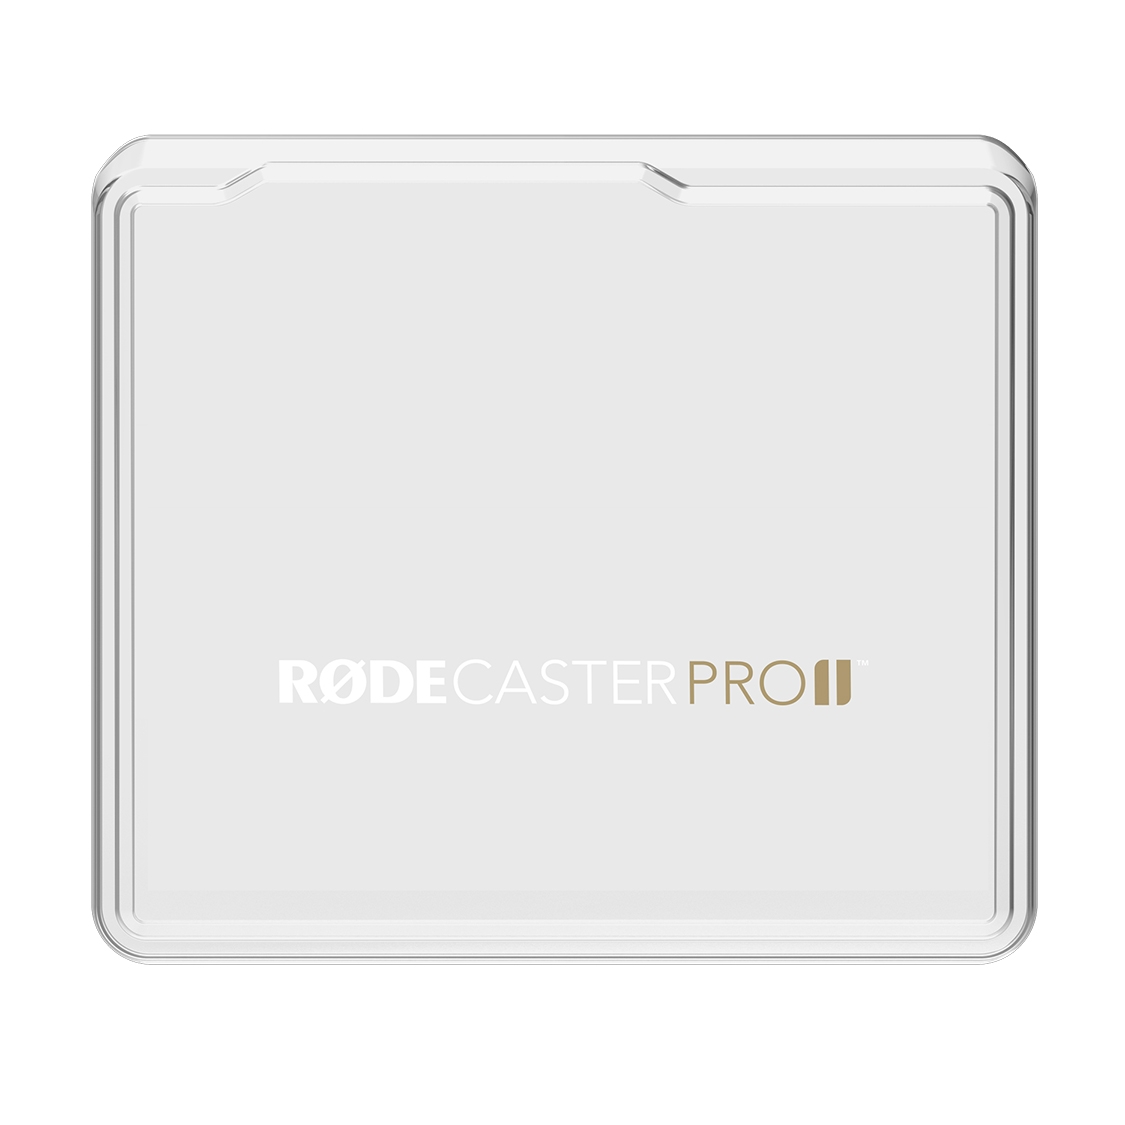 RODE Caster Pro II Cover